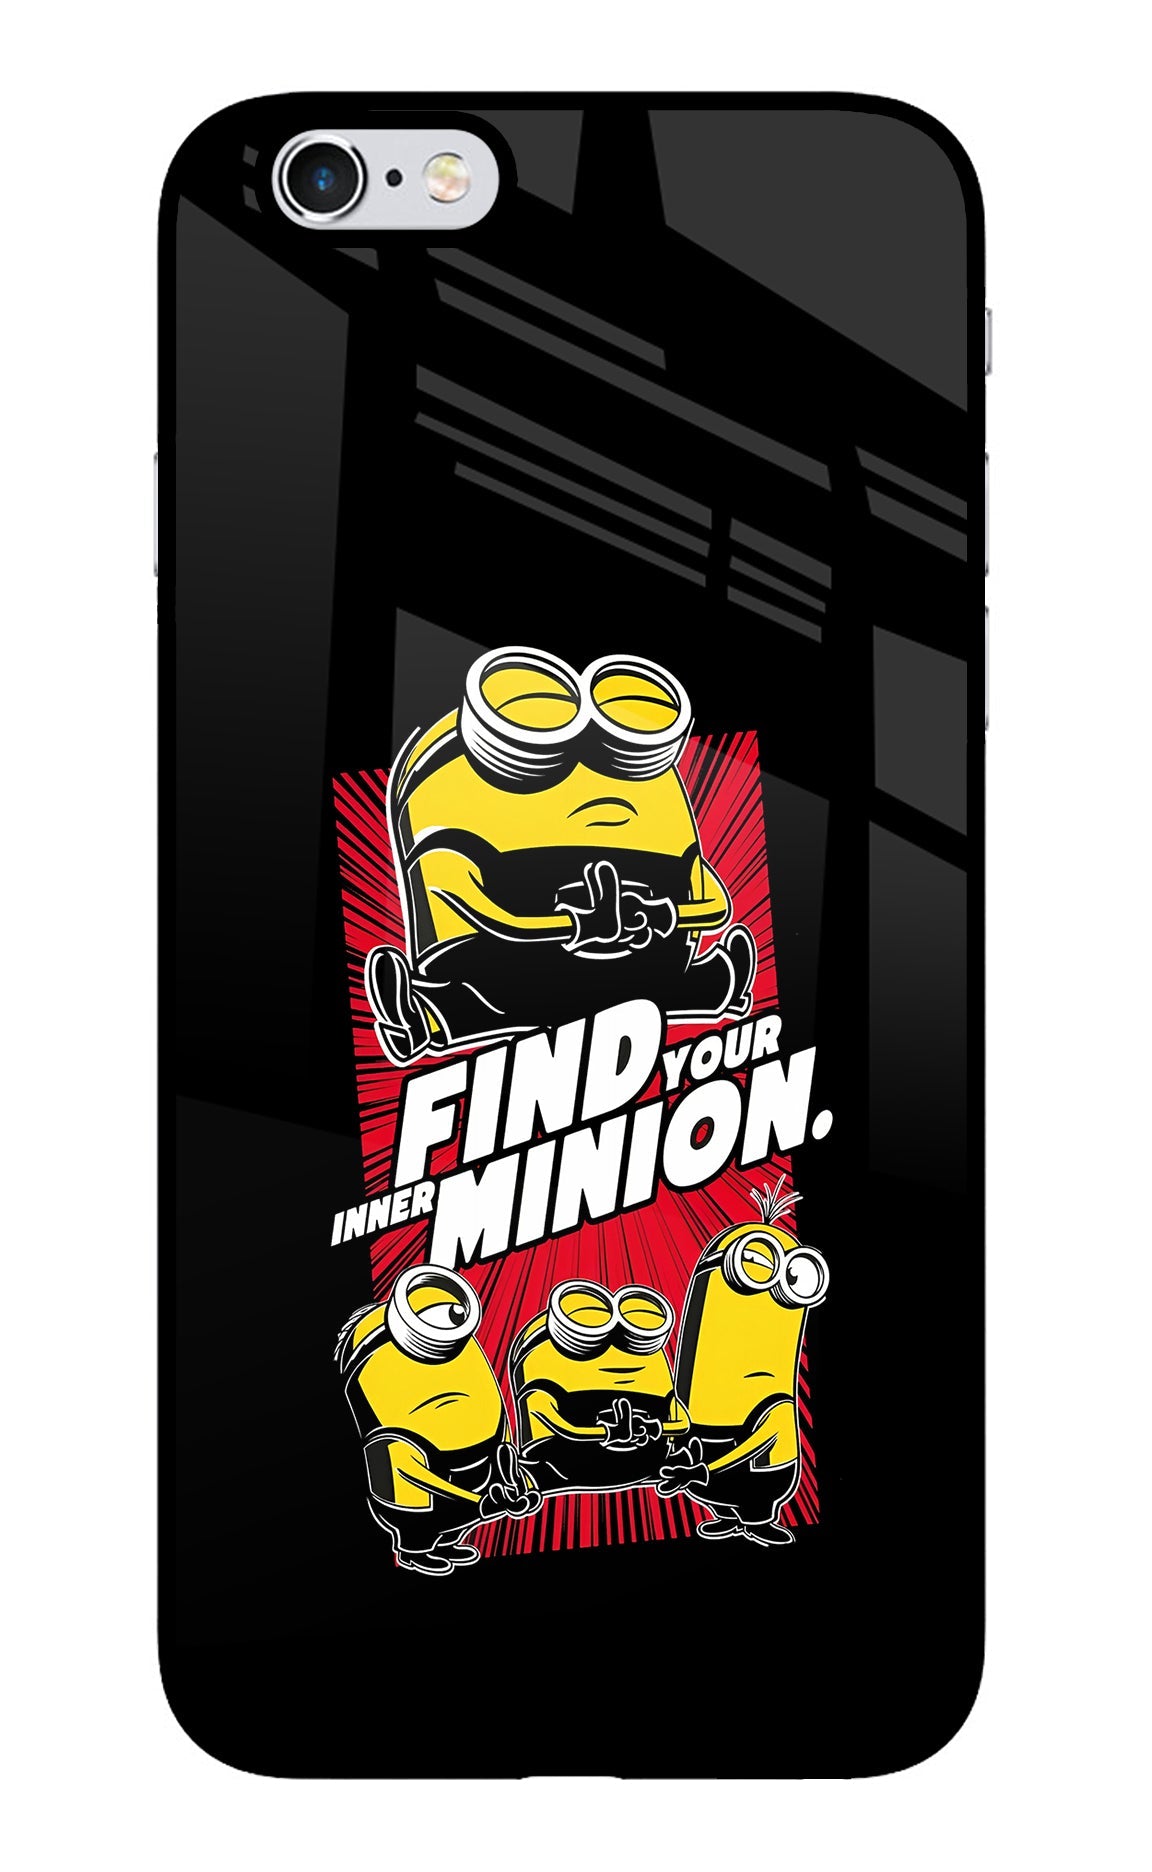 Find your inner Minion iPhone 6/6s Back Cover